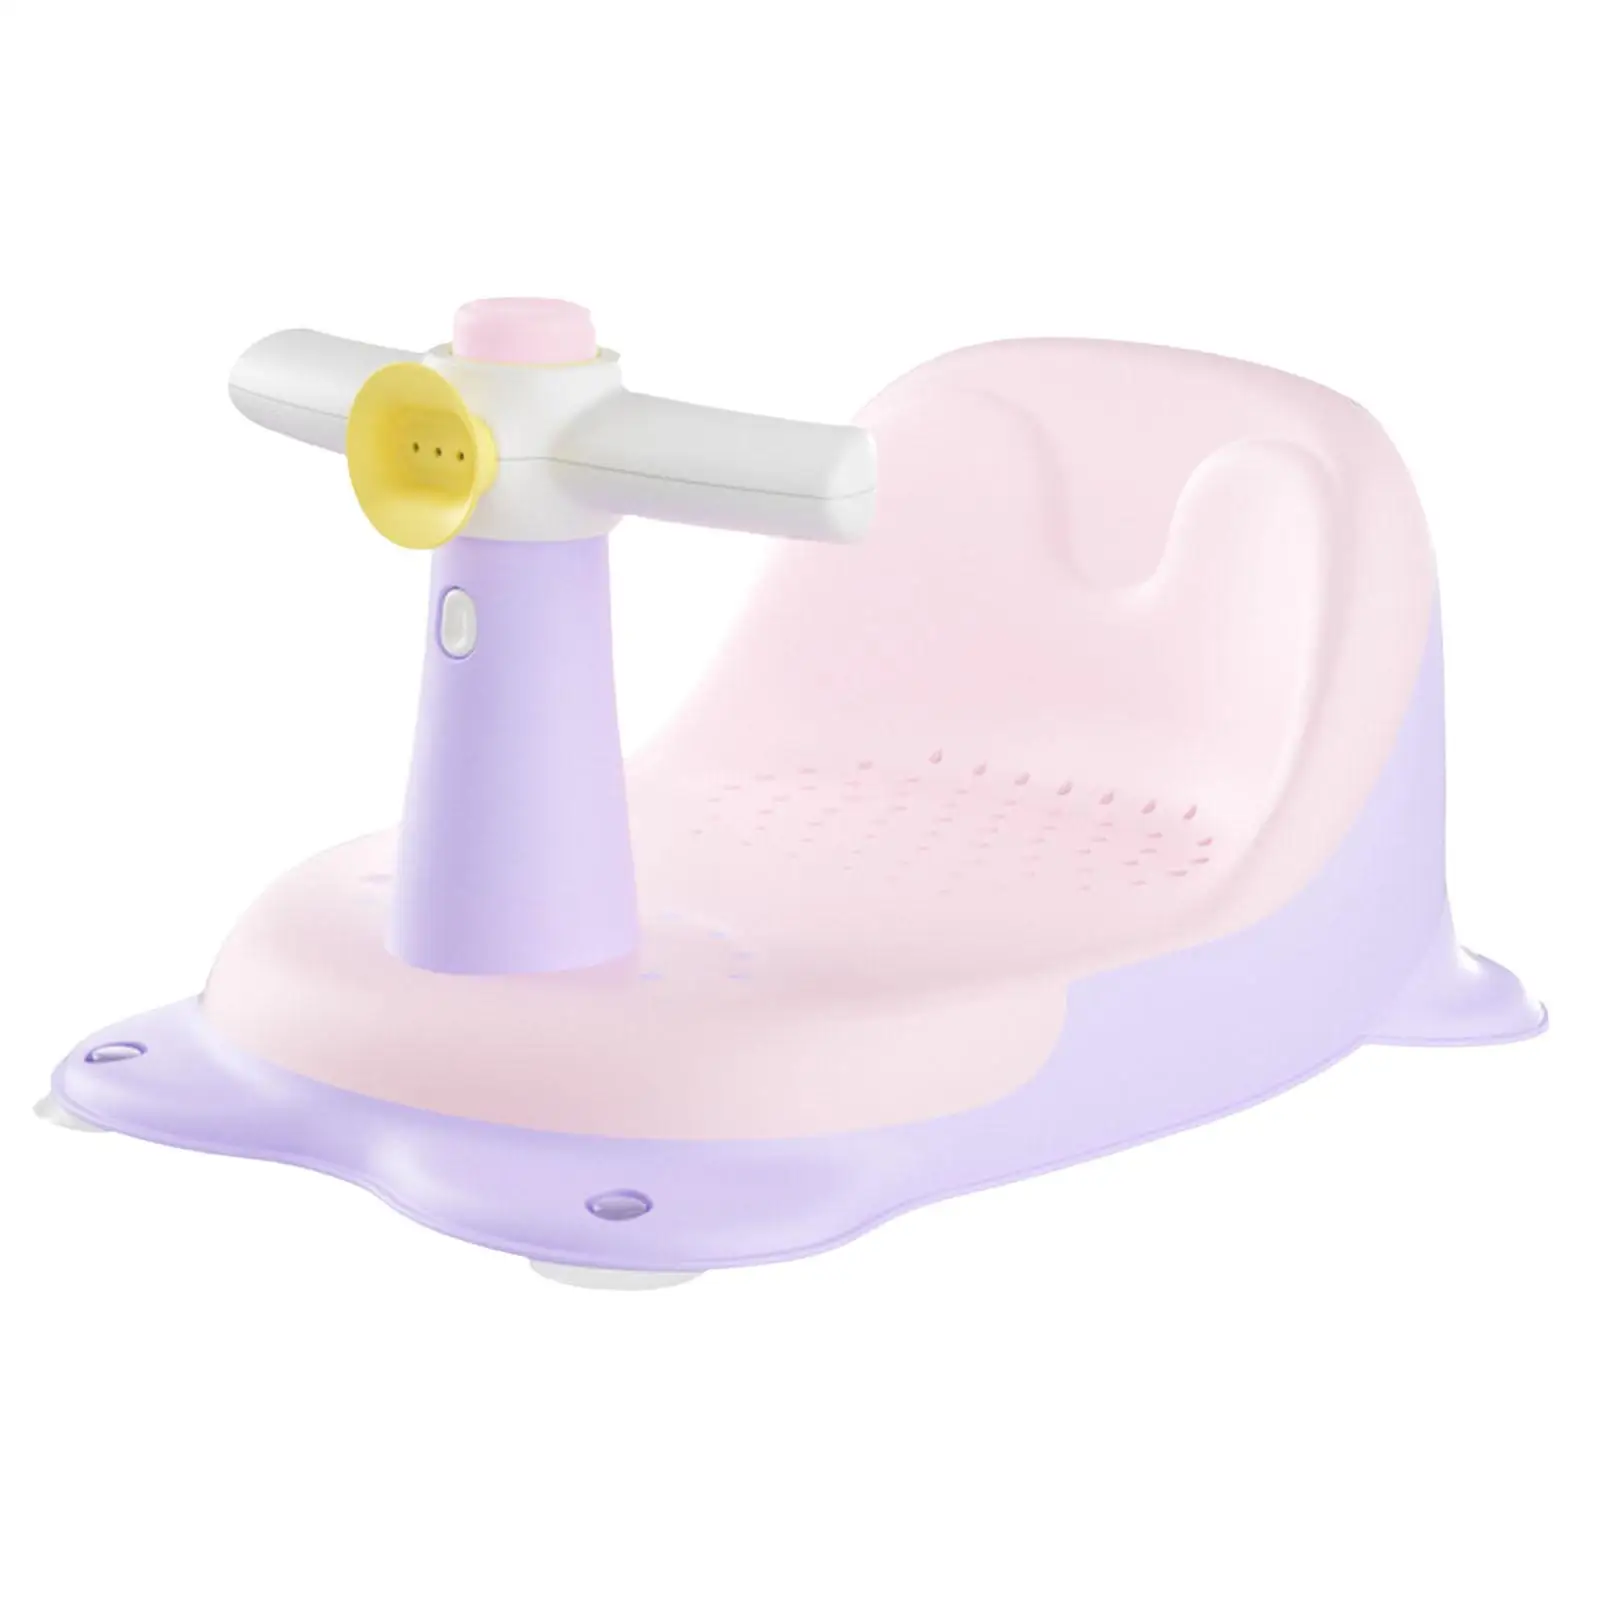 Portable Baby Bathtub Seat Bath Seat Support Seat Pad for 6-18 Months